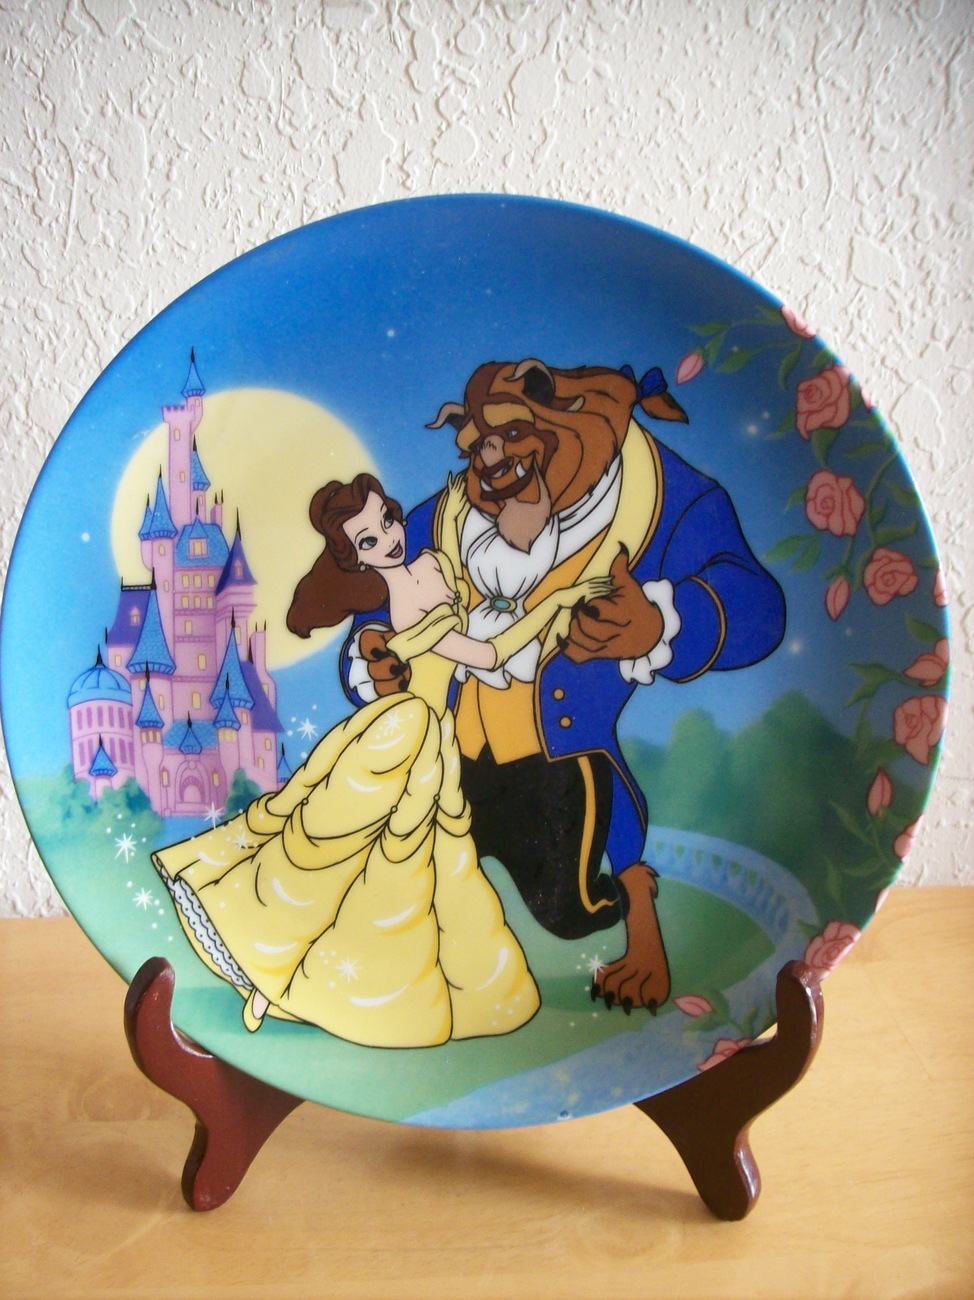 Disney Beauty and the Beast Collector’s Plate  - $35.00